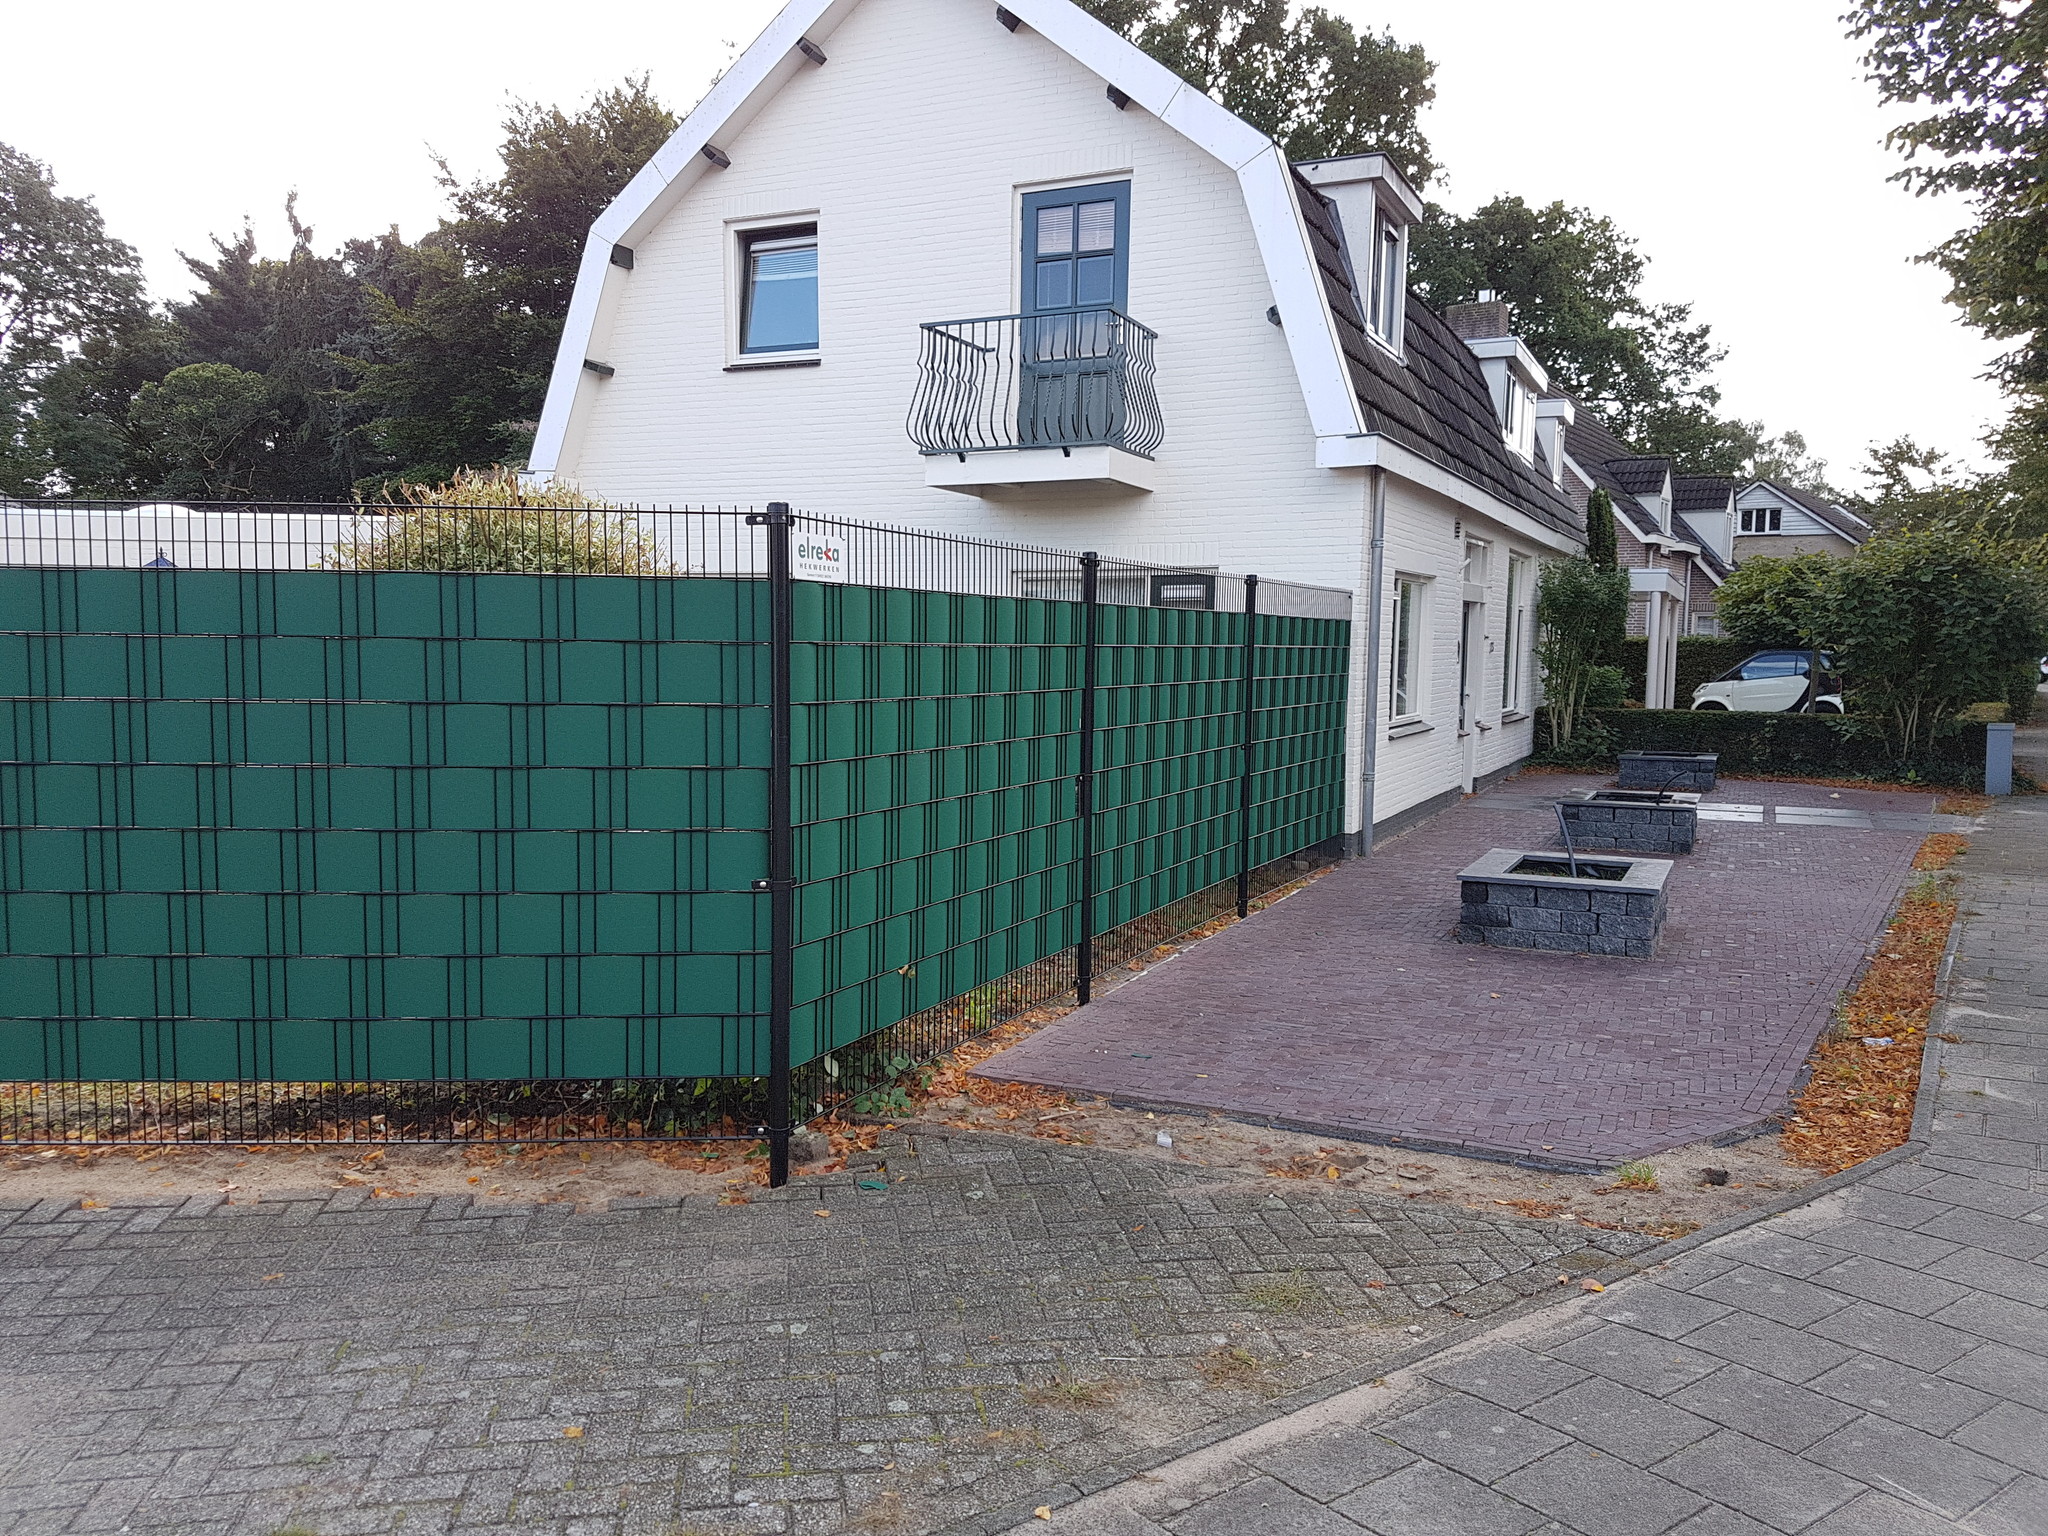 Gipea Easy To Fix Optimal Visibility Protection For Gate & Fence 24 mtr. Gipea Ekoband 19 cm op rol